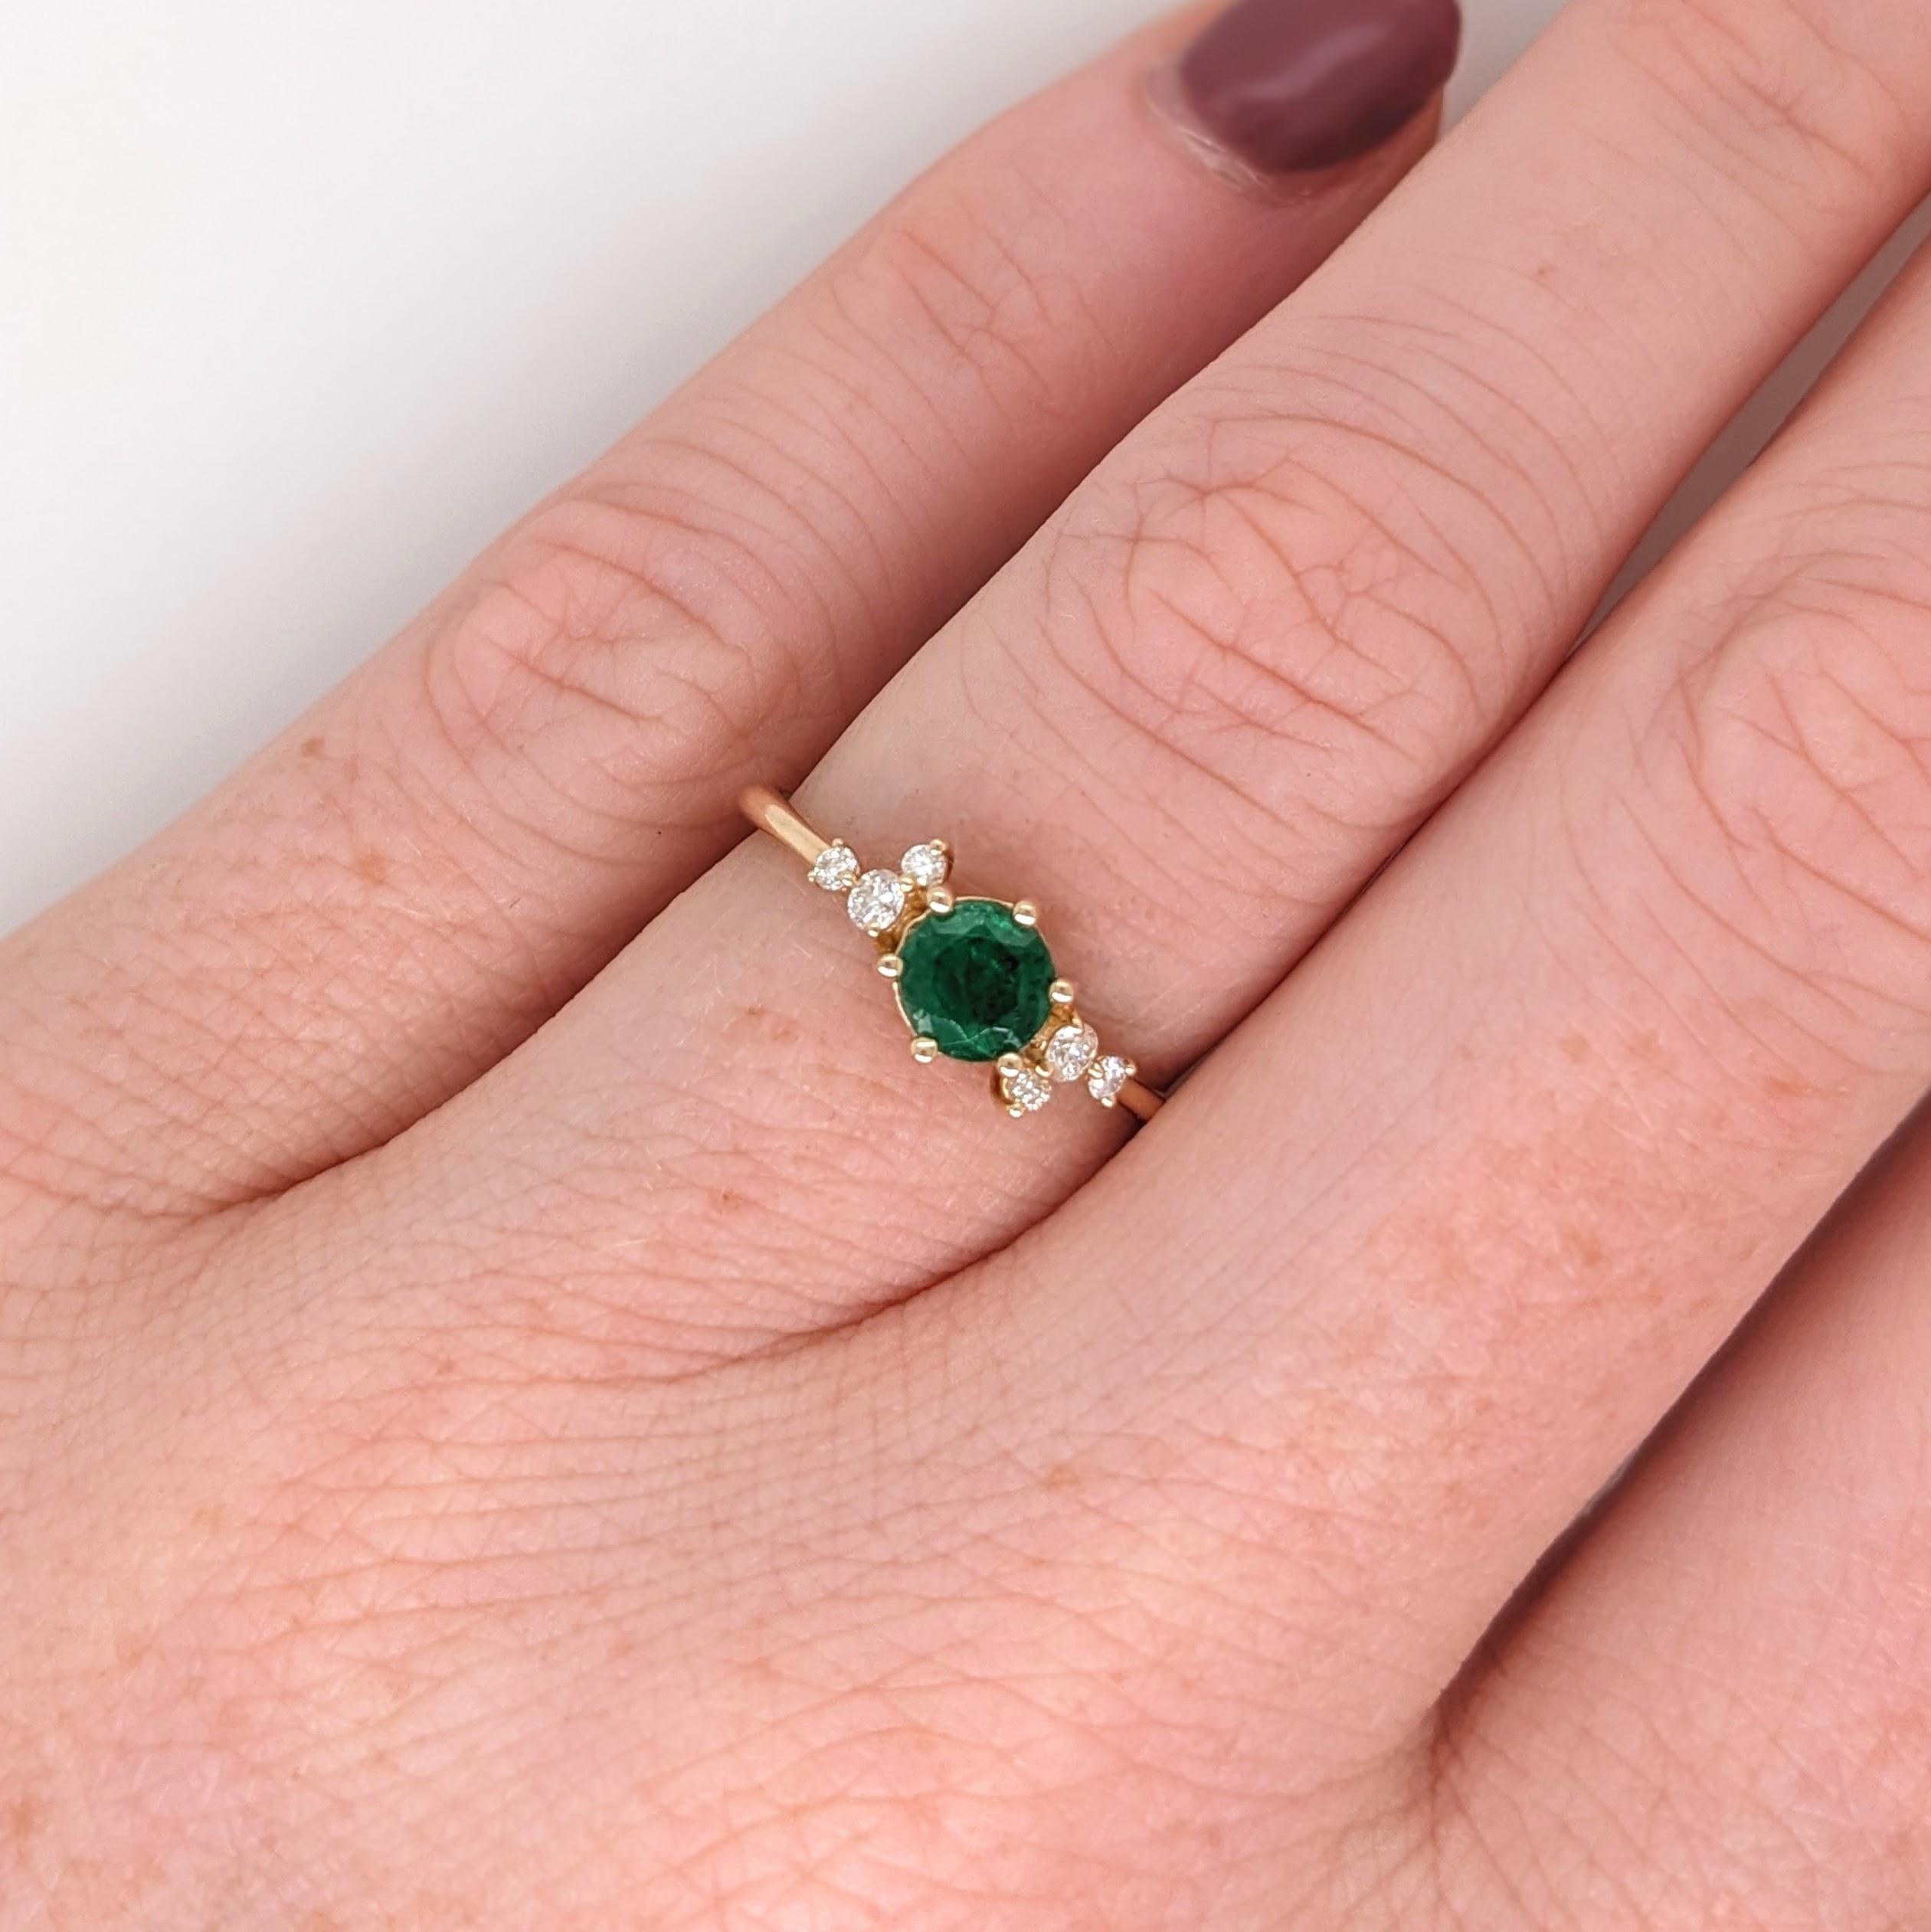 Green Emerald Ring w Earth Mined Diamonds in Solid 14k Yellow Gold Round 5mm 1